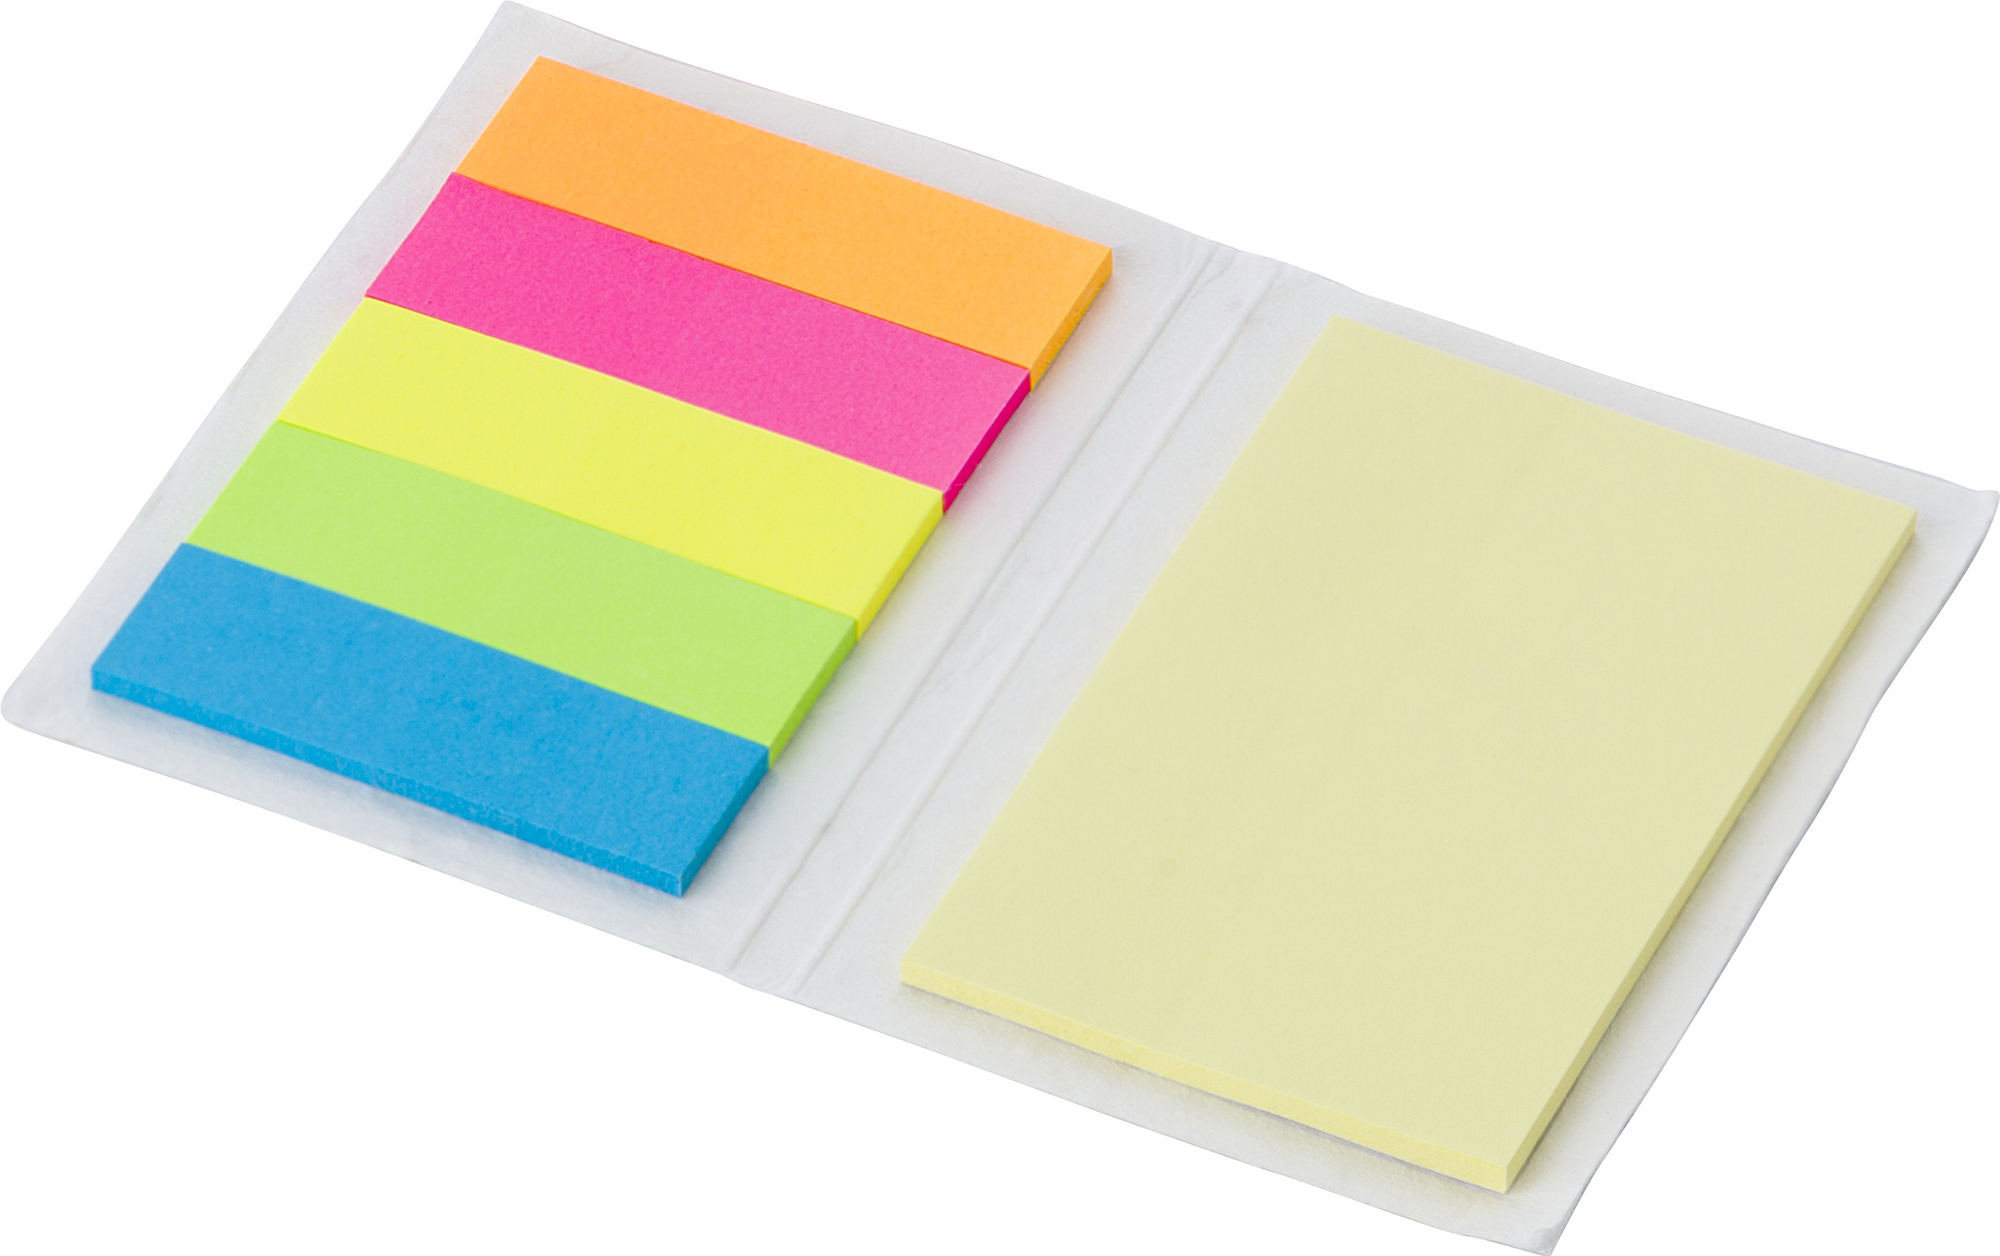 000000864476 002999999 3d045 ins pro01 2022 fal - Seed paper cover with sticky notes